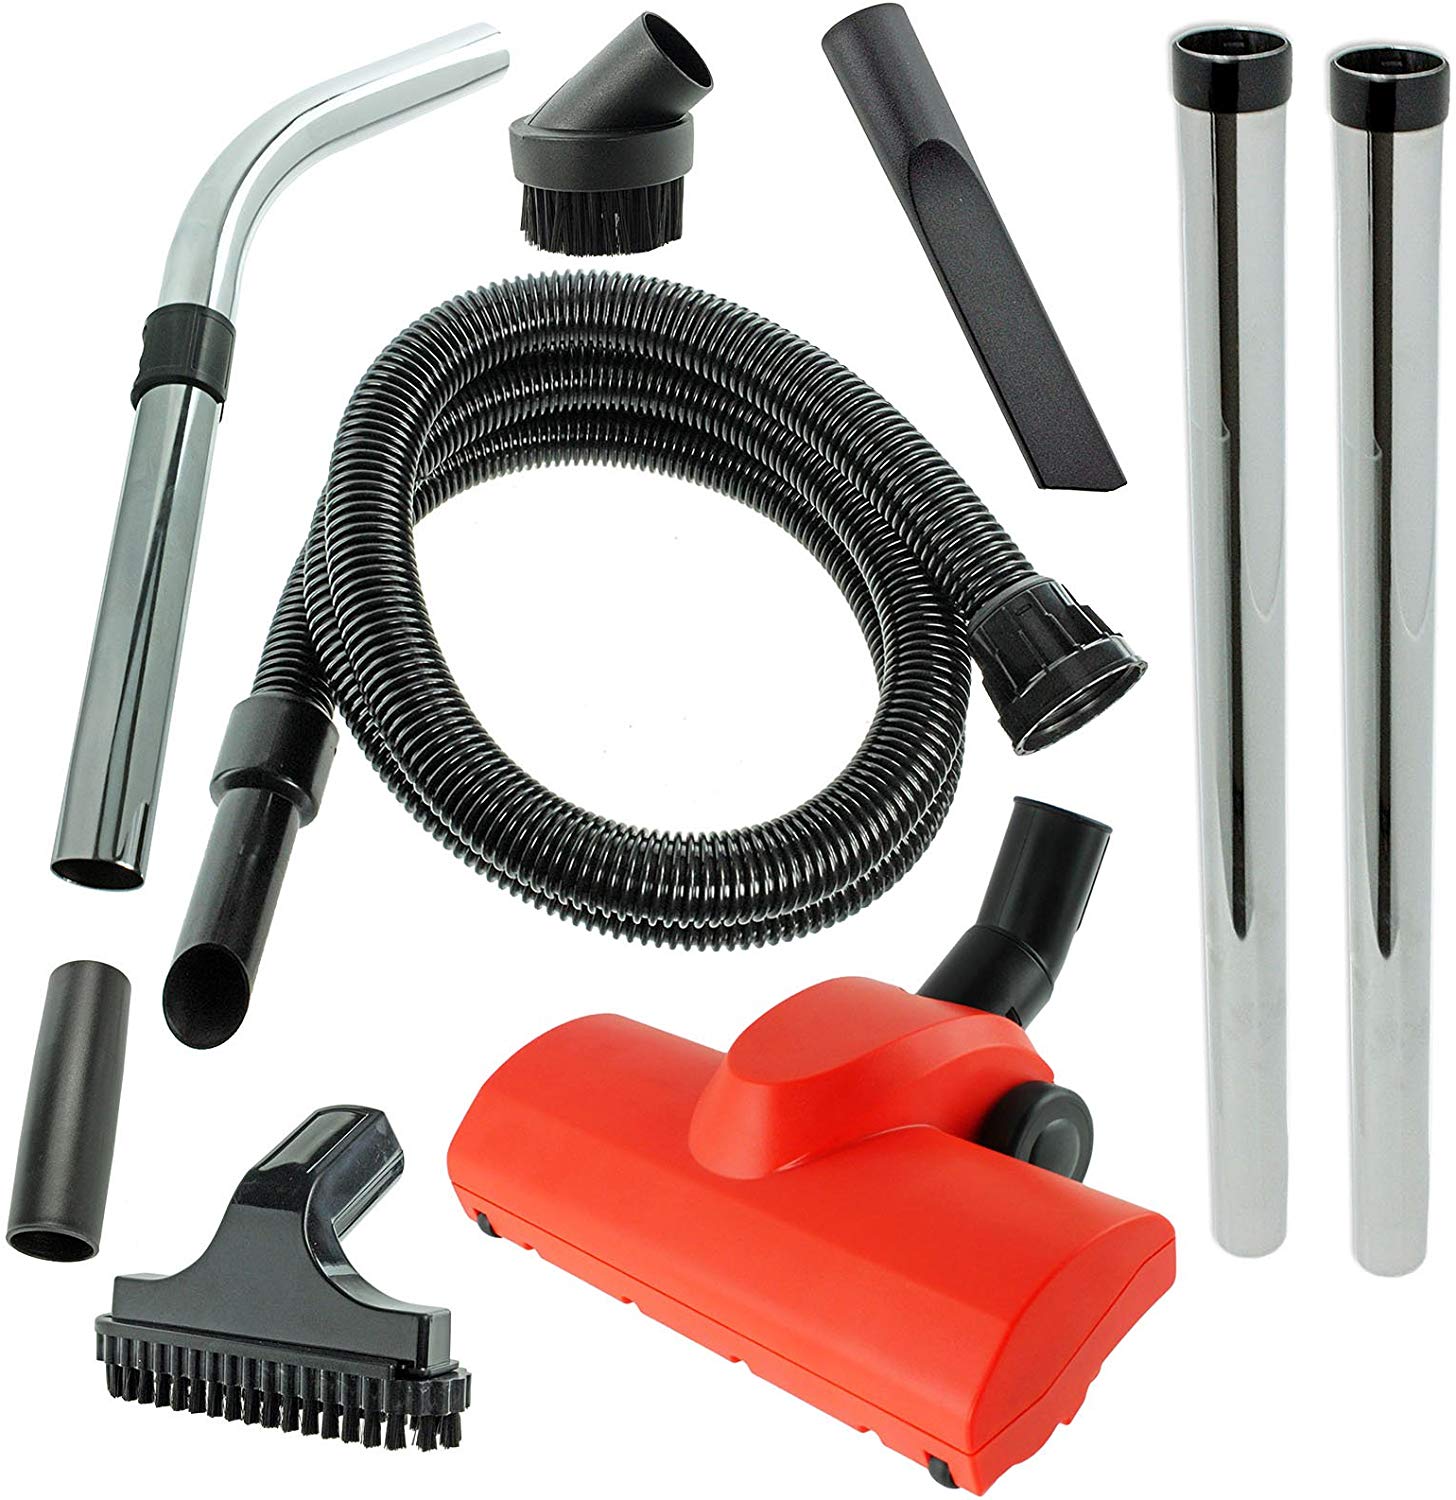 SPARES2GO Hose Tool Kit Red Turbo For Numatic Henry Hetty James Vacuum Cleaner Hoover 2.5m